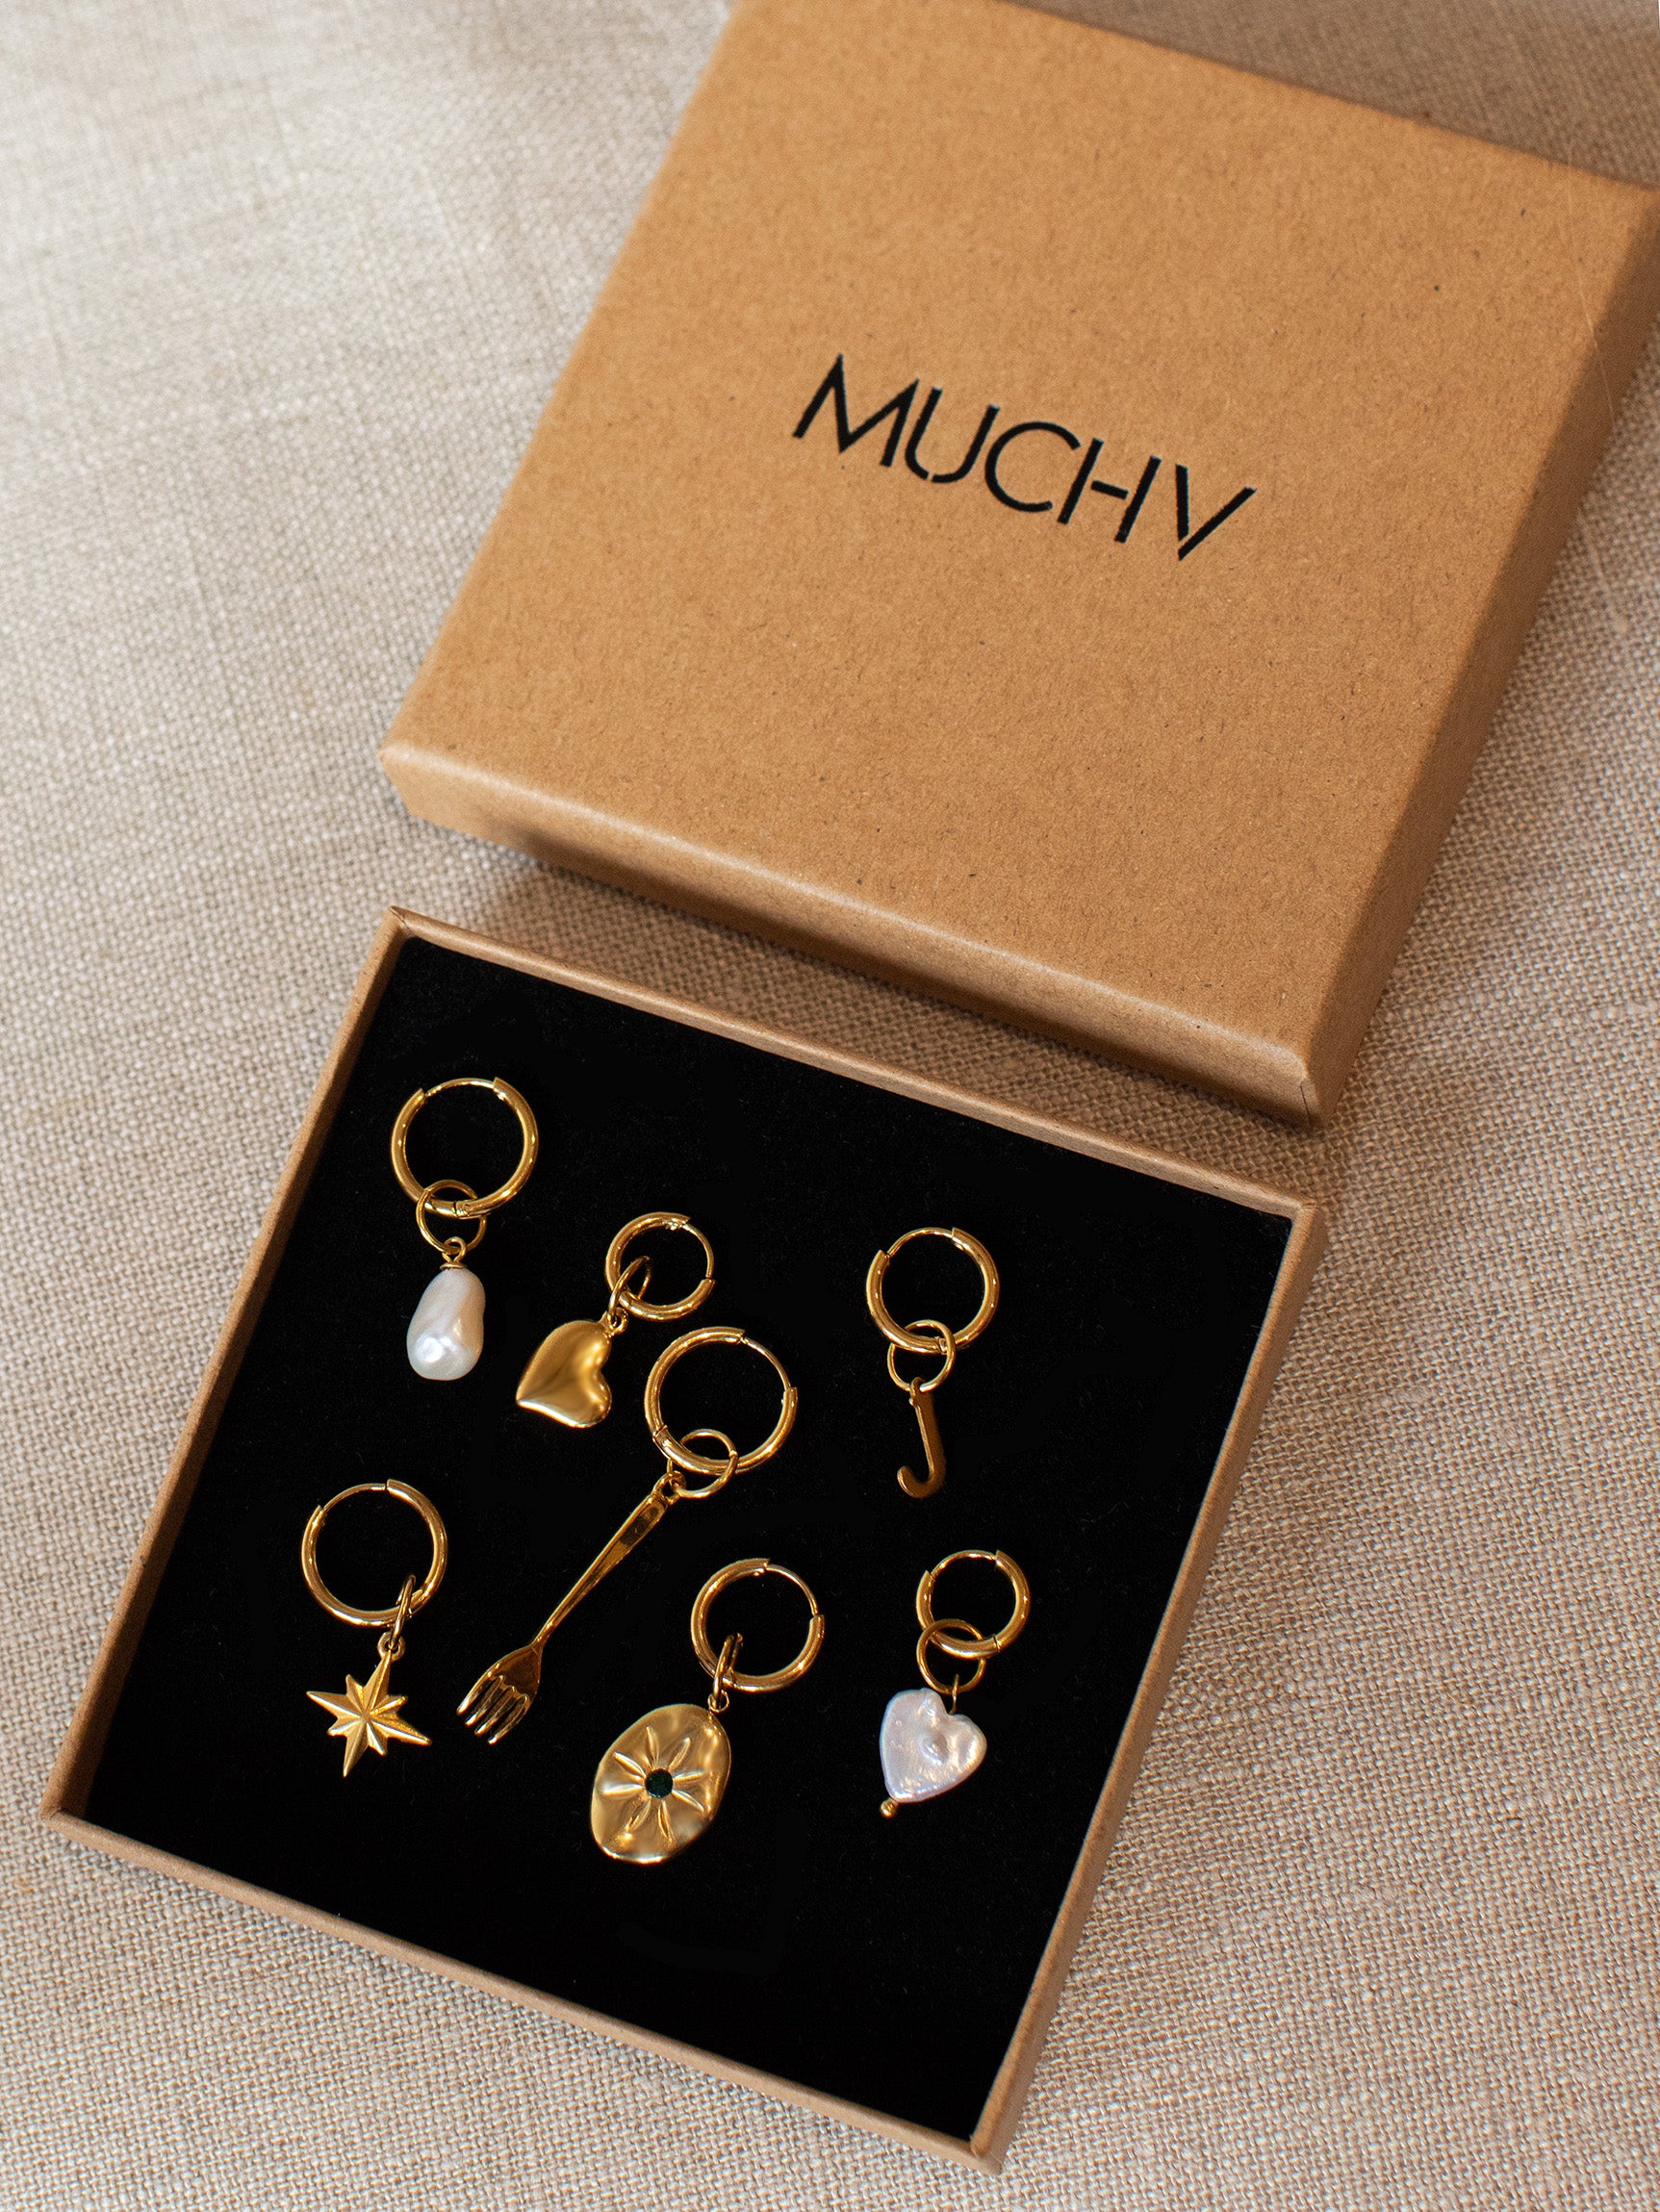 Design Your Own Jewellery - Customisable Earrings, Necklaces and Bracelets